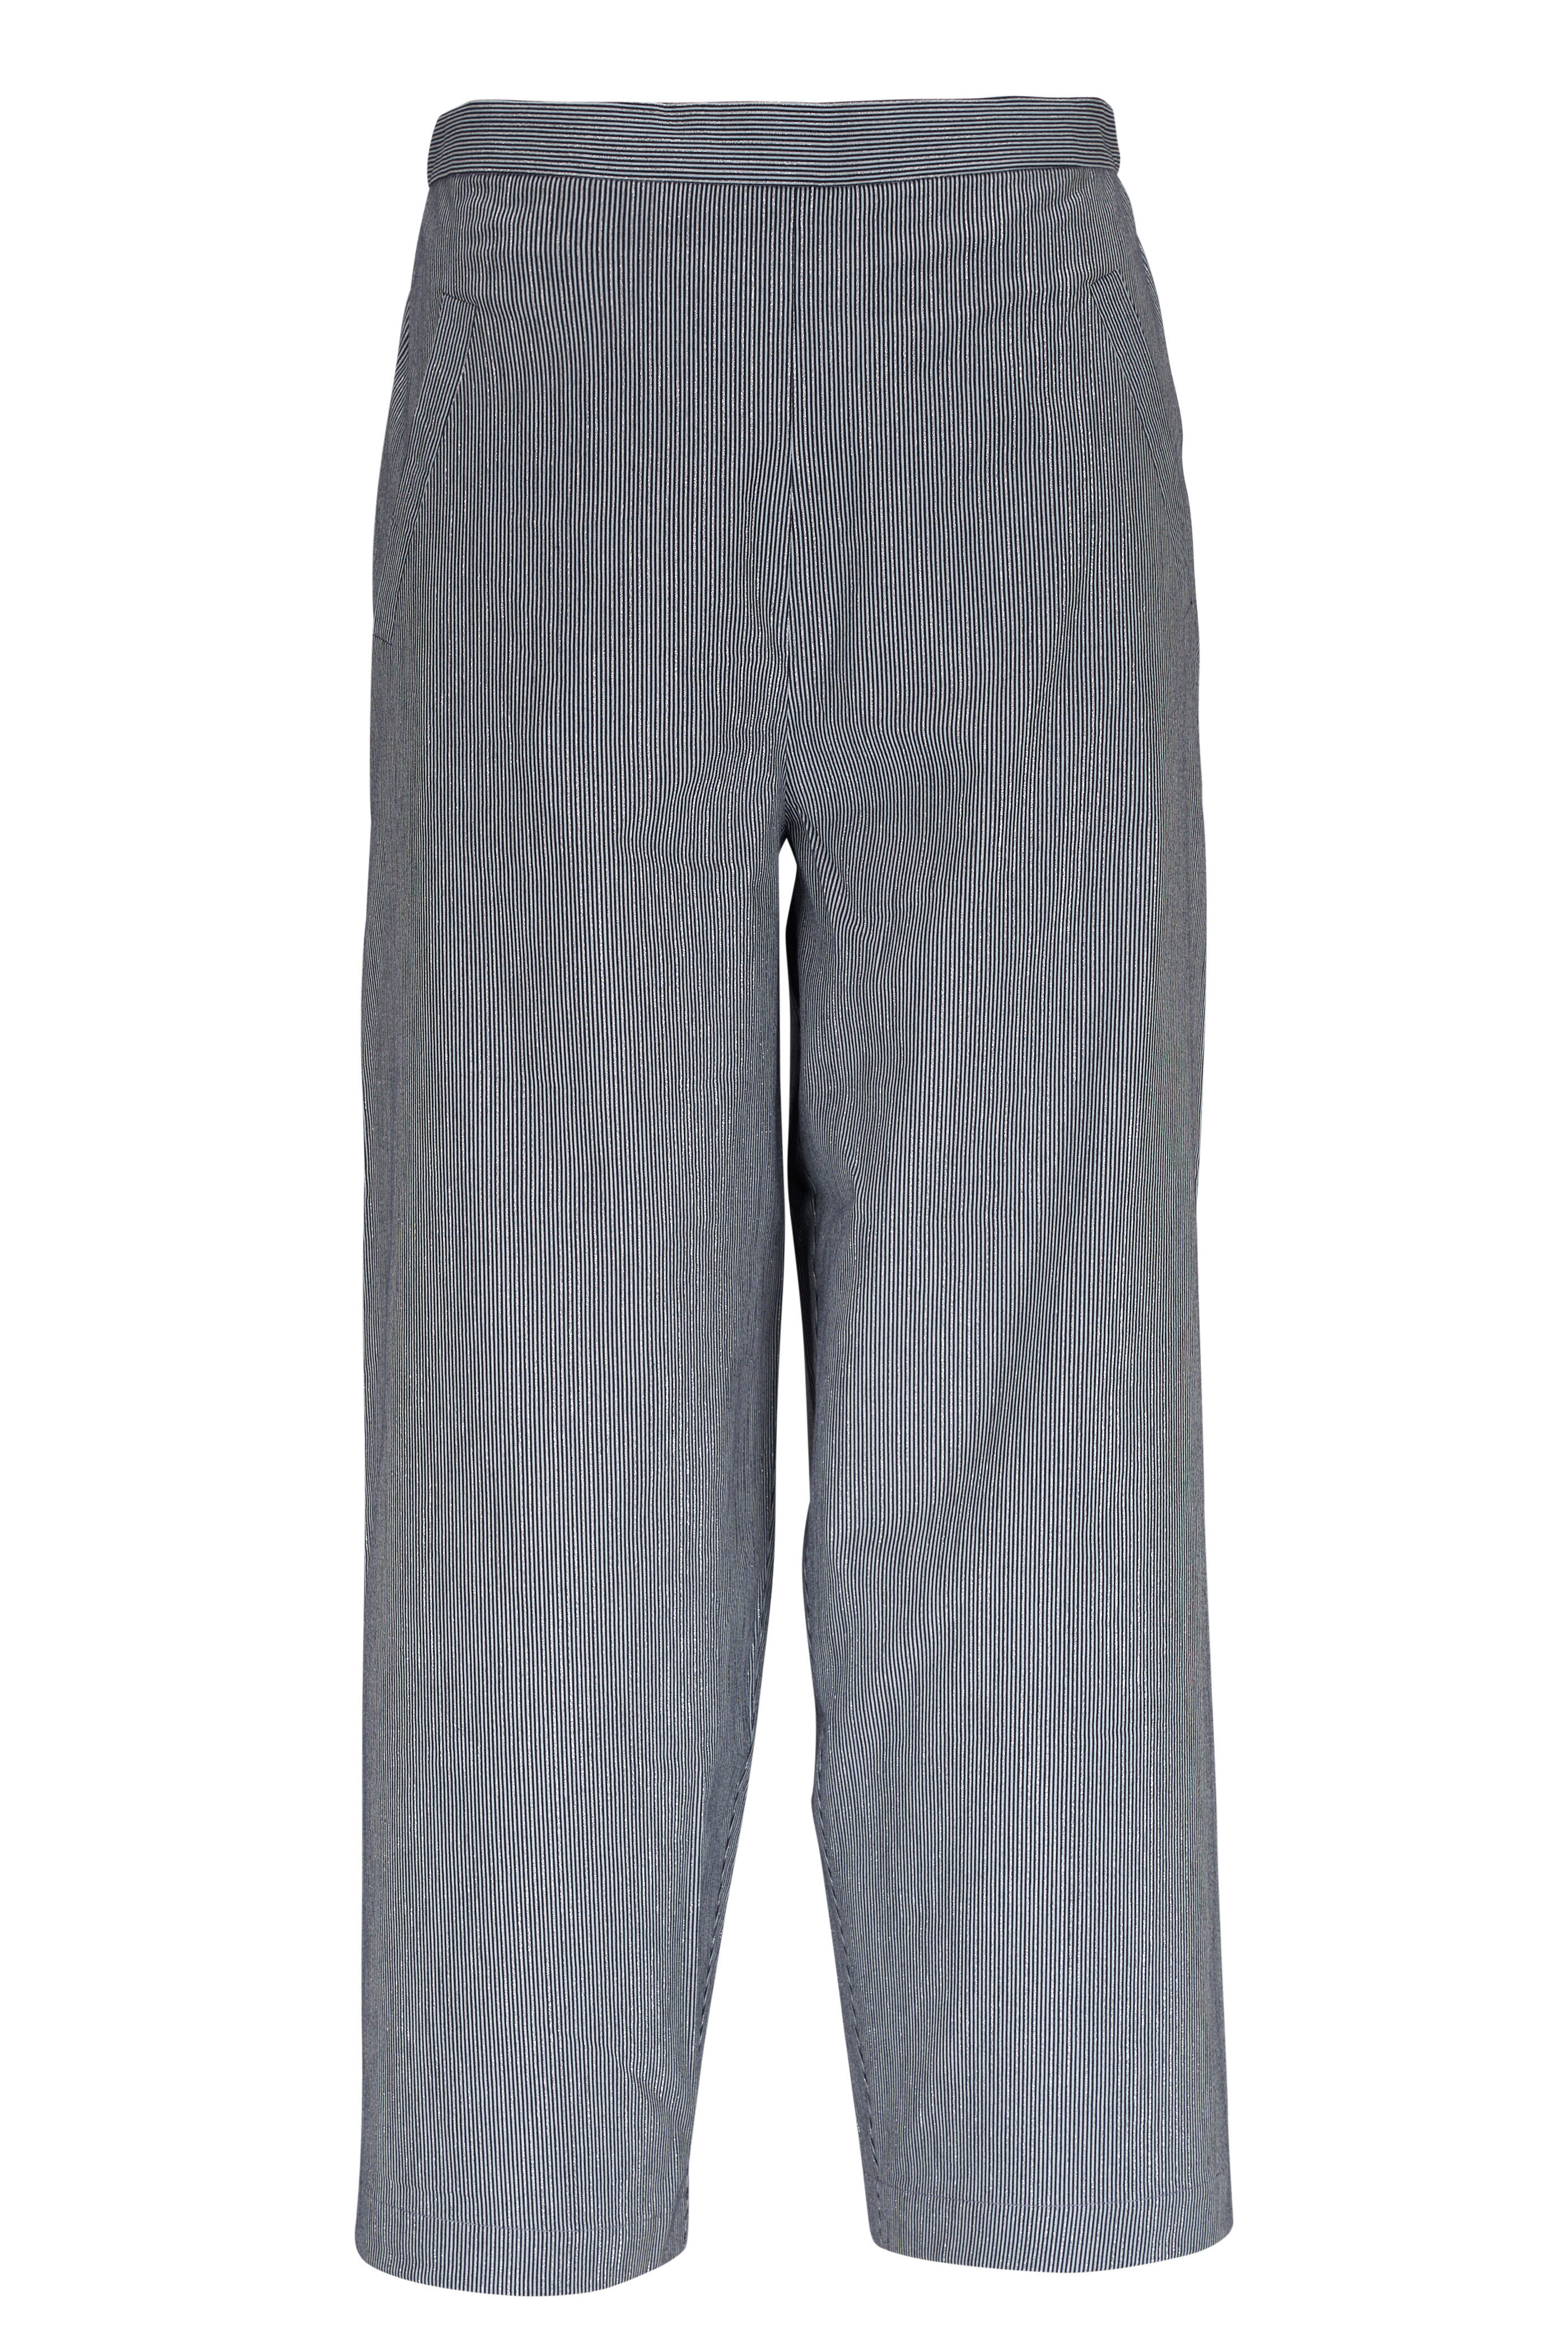 Peter Cohen - Todd Blue Lurex Striped Pant | Mitchell Stores